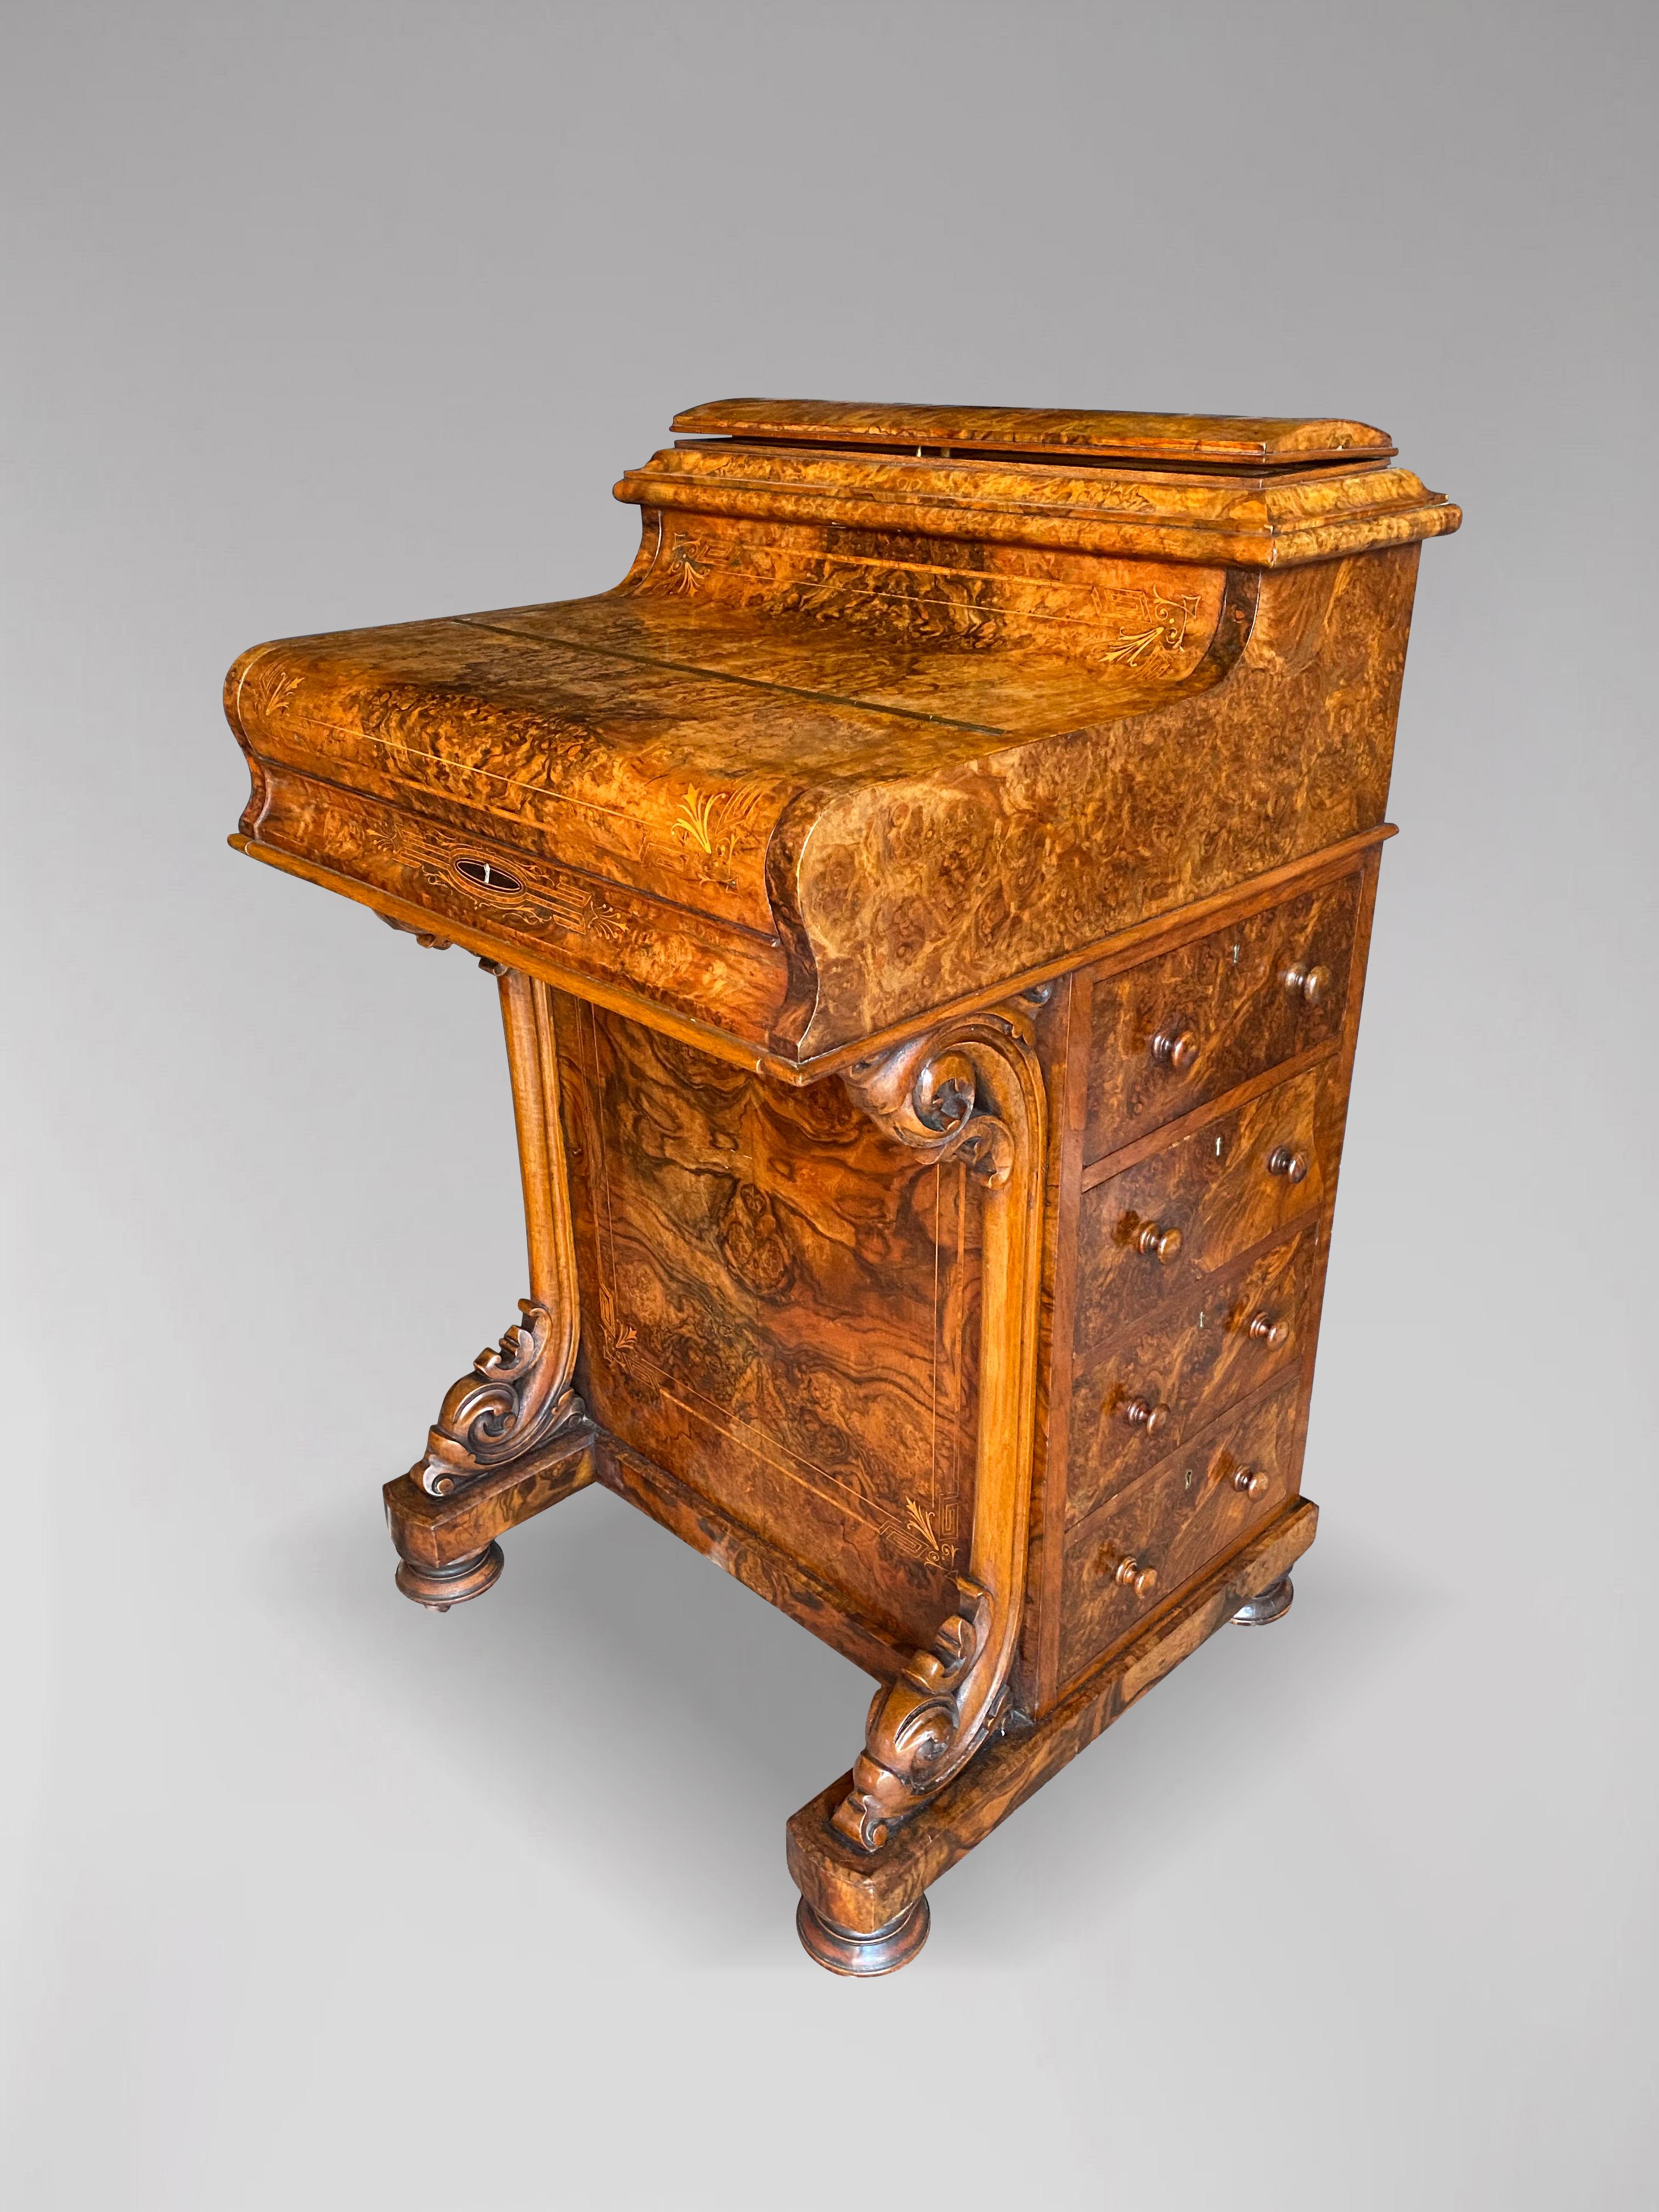 A stunning 19th century figured burr walnut Davenport desk. The piano top fall lifts to reveal 2 burr walnut veneered drawers and a pull out and adjustable writing slope which retains the original gold tooled red leather writing surface. This